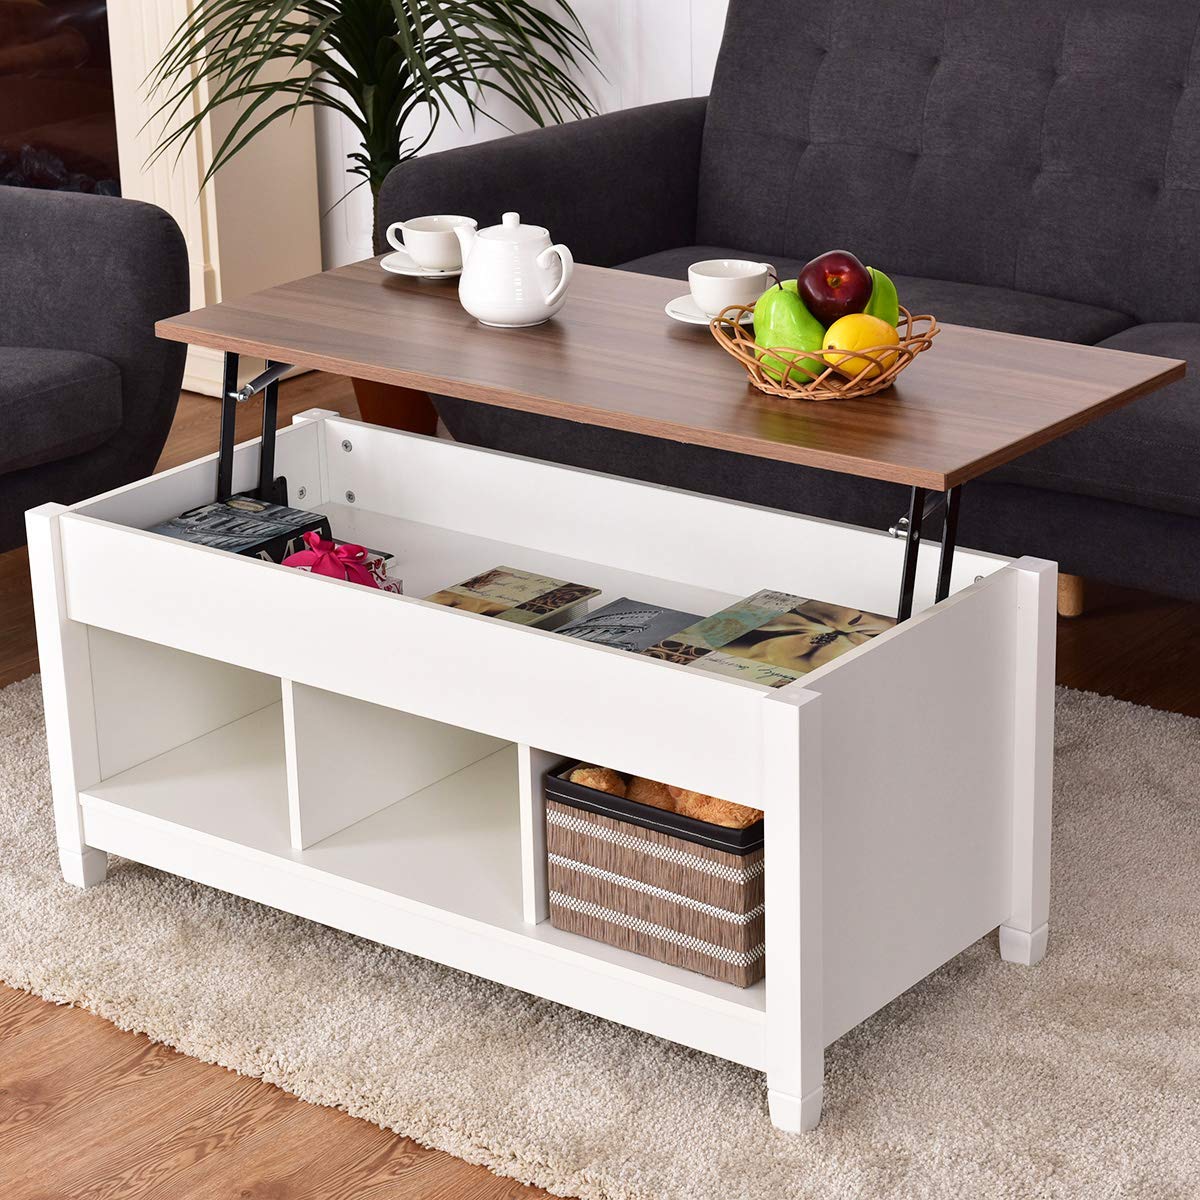 Tangkula Coffee Table Lift Top Wood Home Living Room Modern Lift Top Storage Coffee Table w/Hidden Compartment Lift Tabletop Furniture (White)